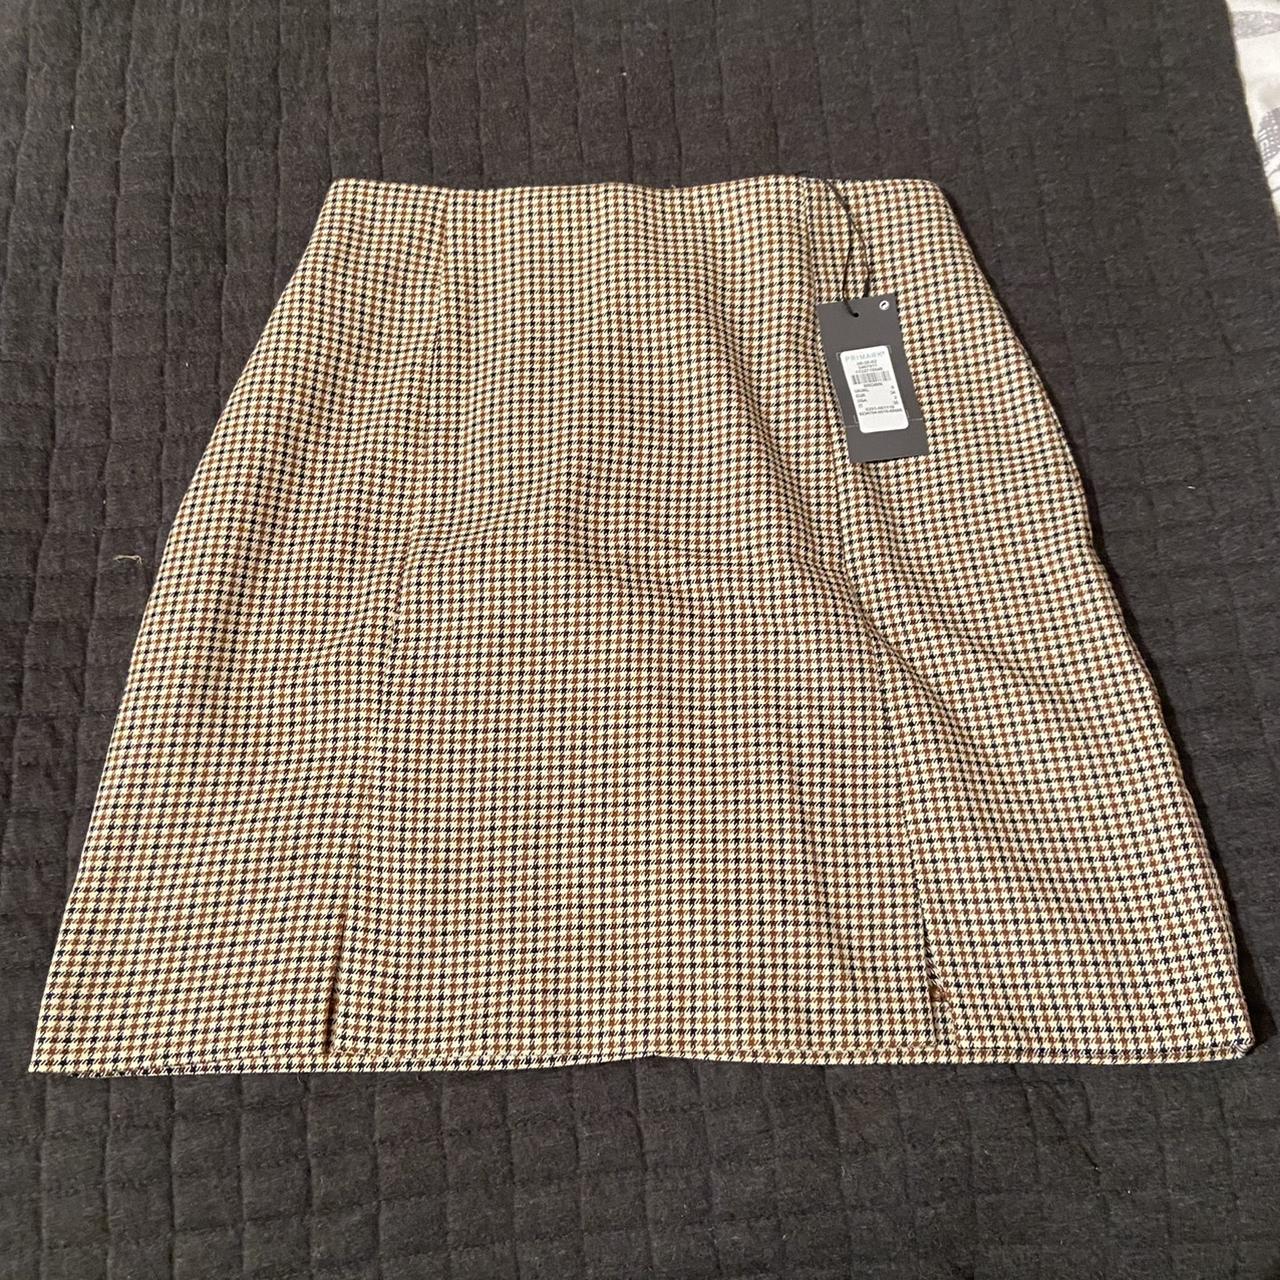 Primark dog tooth skirt with small slit, never worn - Depop